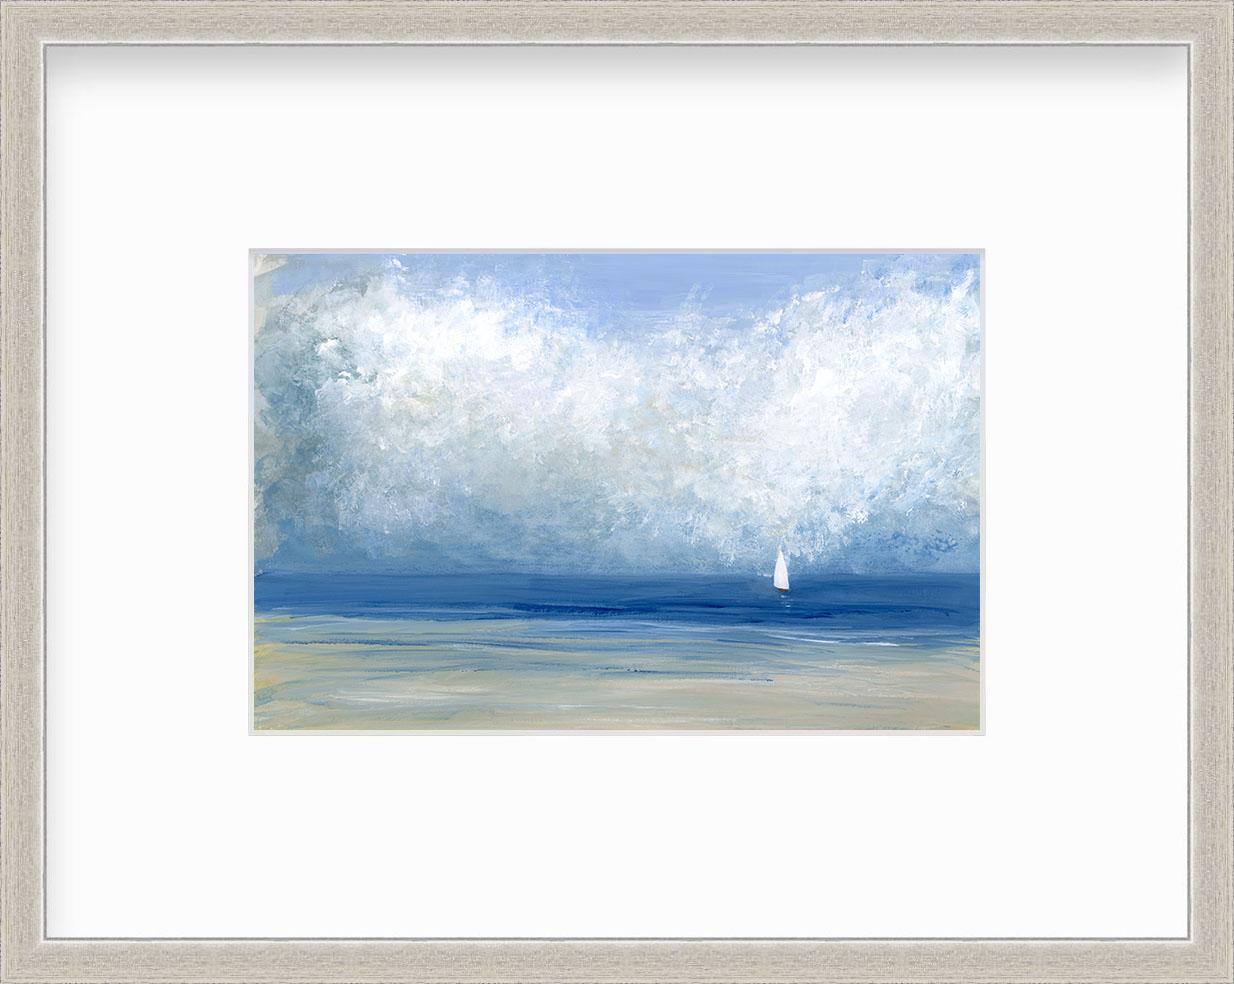 S. Cora Aldo Landscape Print - "Heading In, " Framed Limited Edition Giclee Print, 8" x 12"